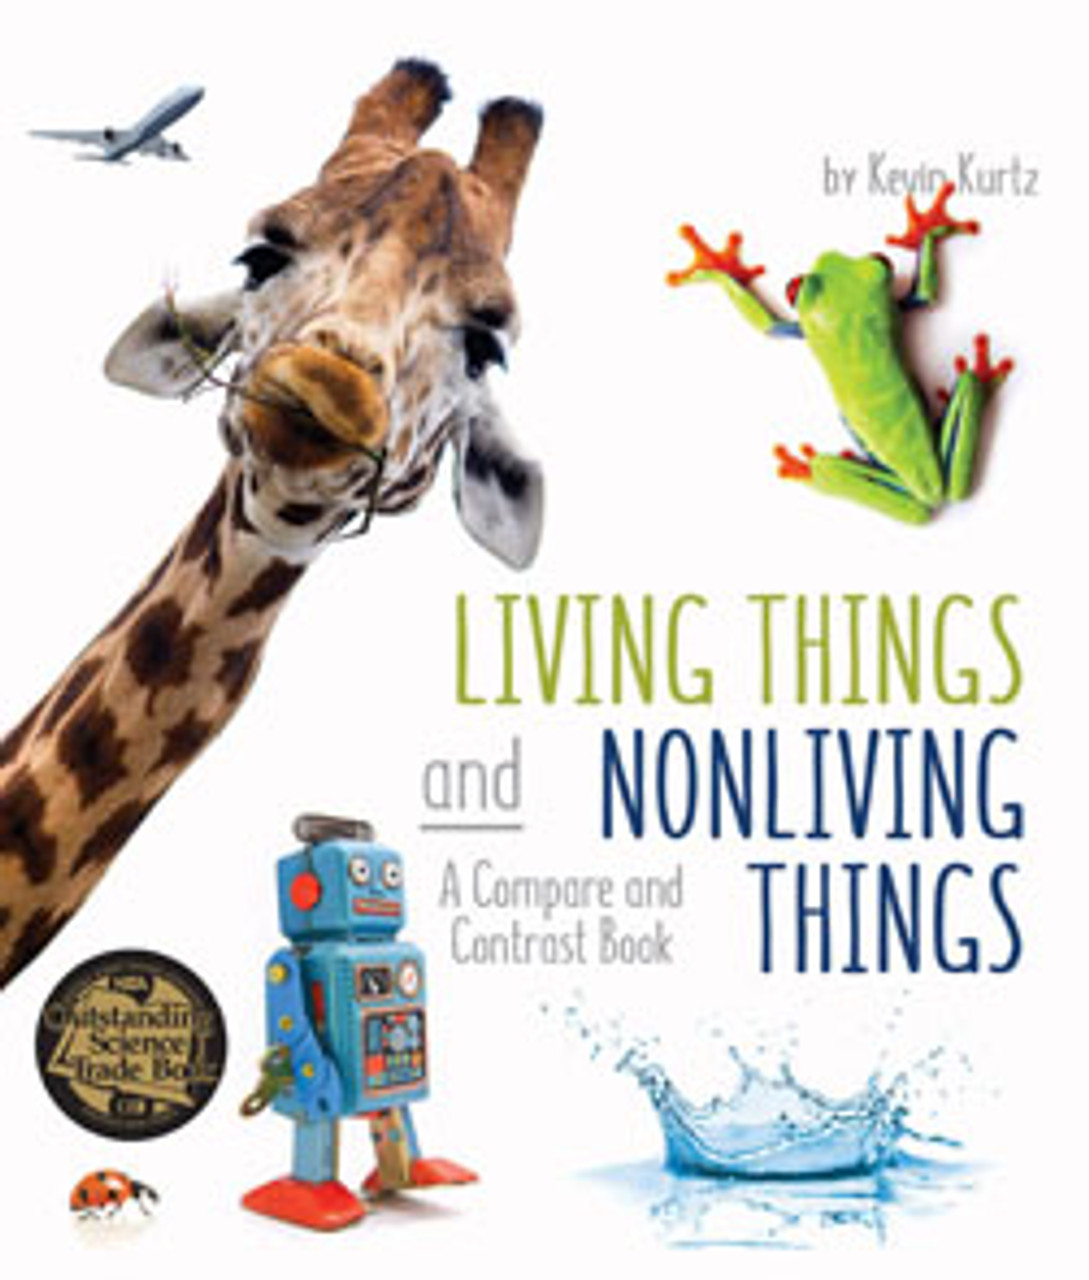 Living Things and Nonliving Things by Kevin Kurtz